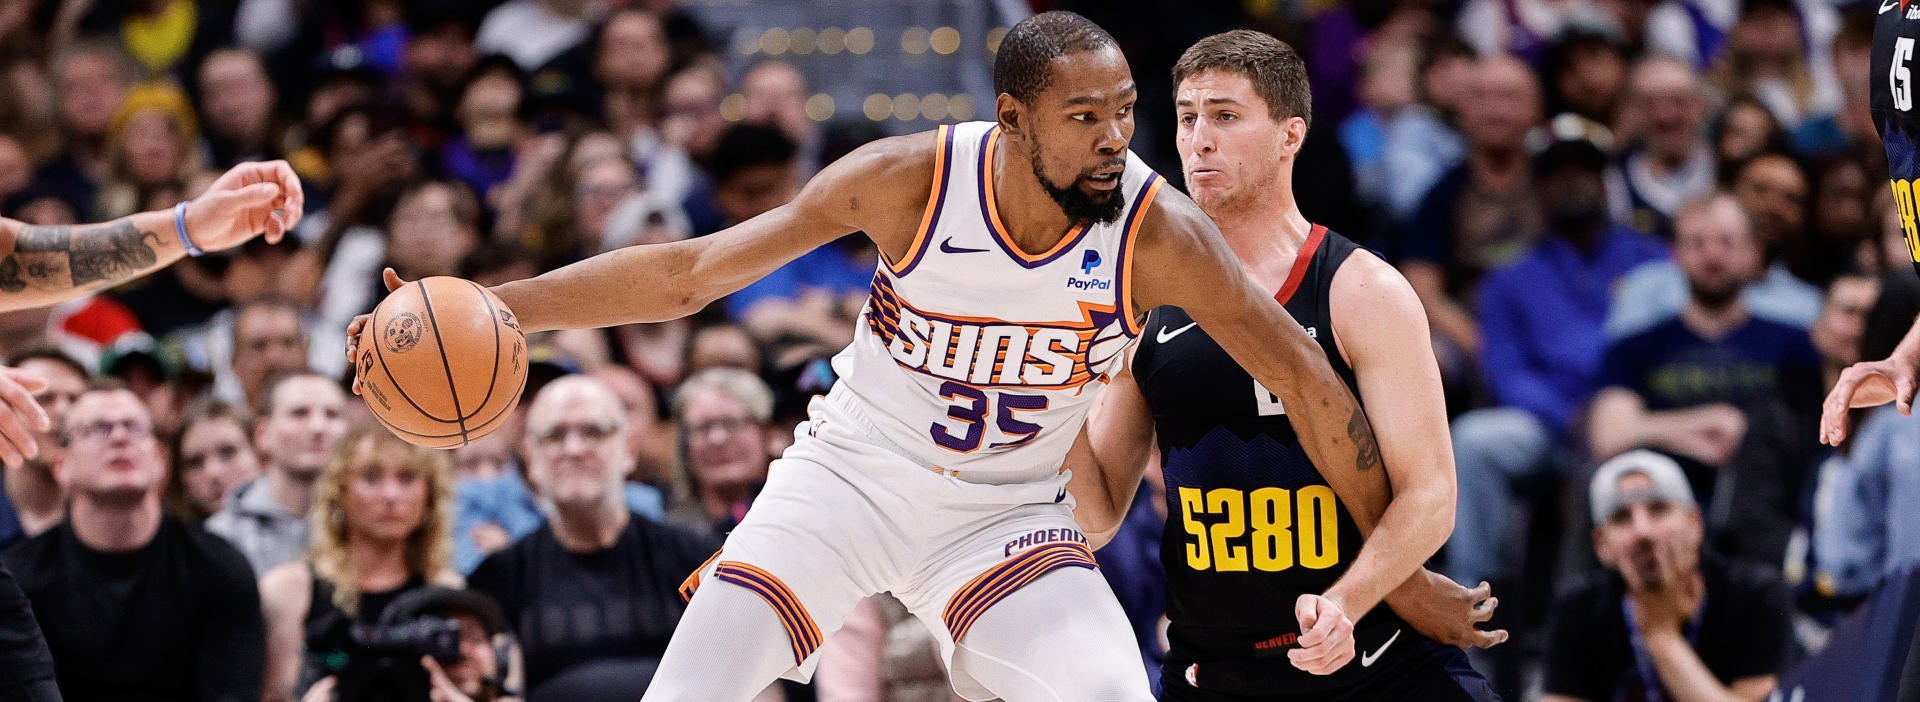 Suns vs. Timberwolves odds, line: Proven NBA model reveals spread picks for Game 3 playoff matchup